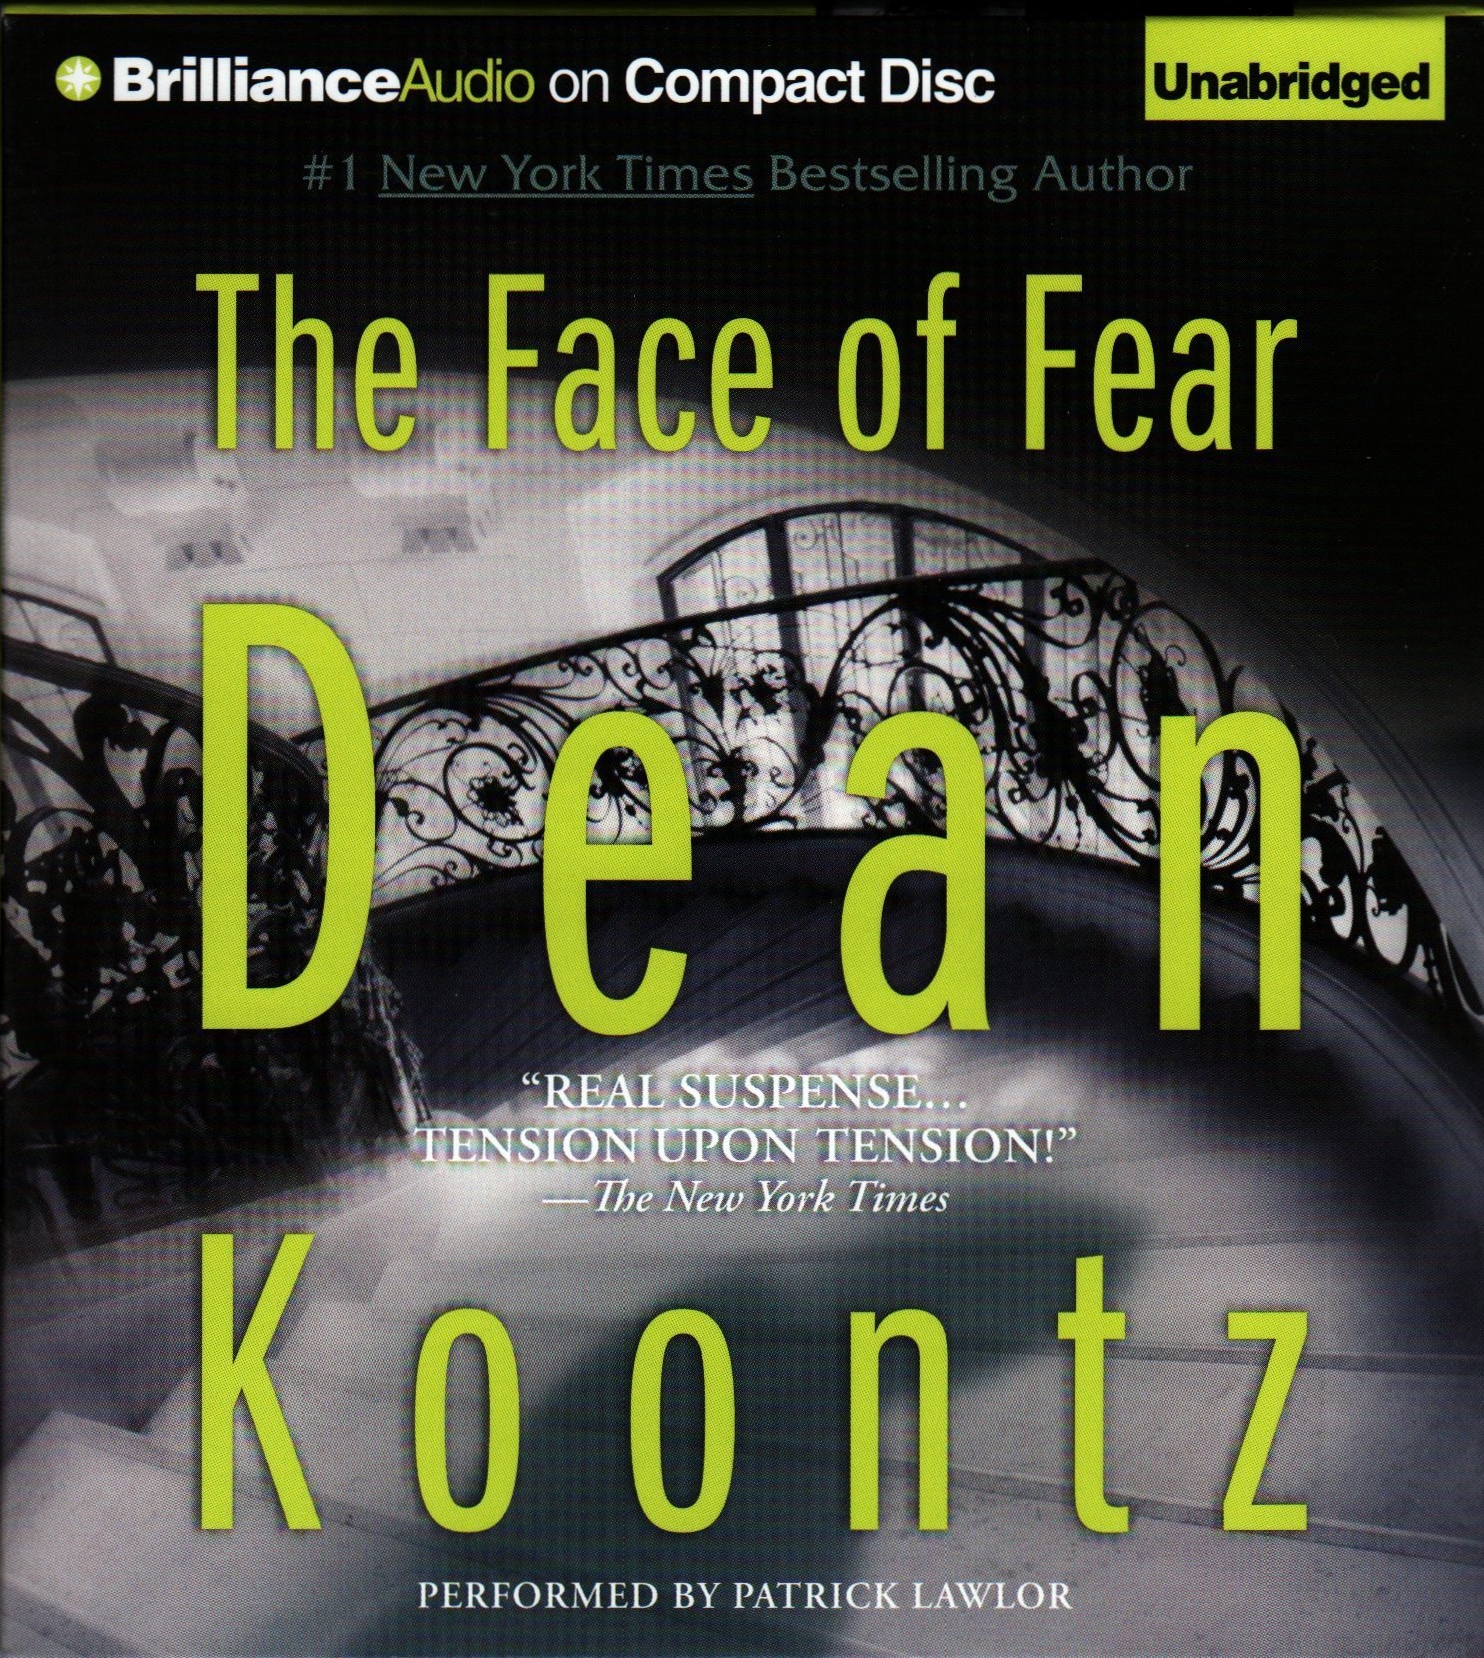 The Face of Fear by Brian Coffey